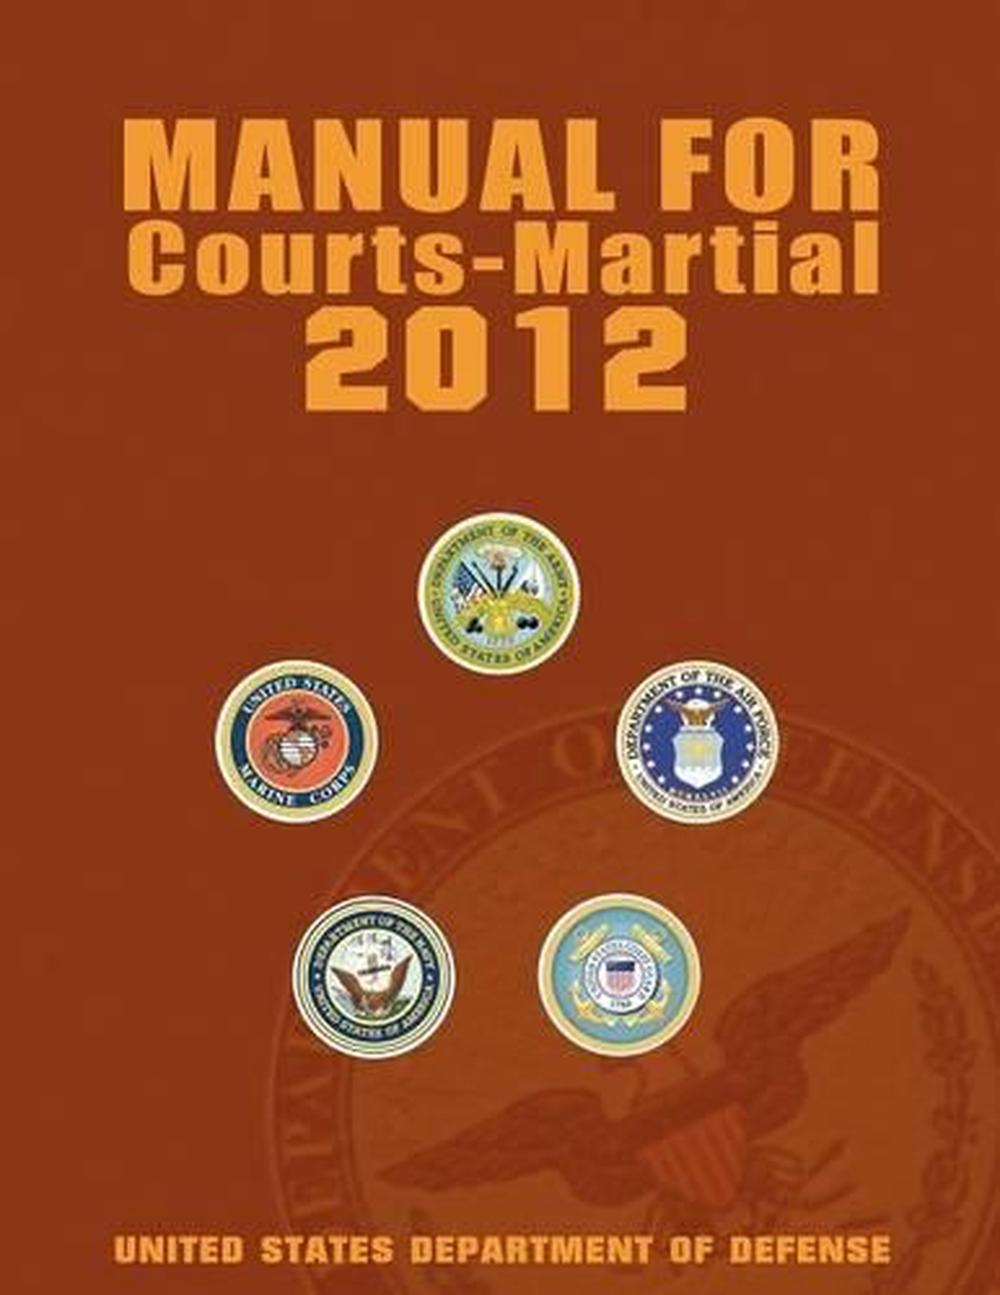 Manual for Courts Martial 2012 (Unabridged) by United States Department